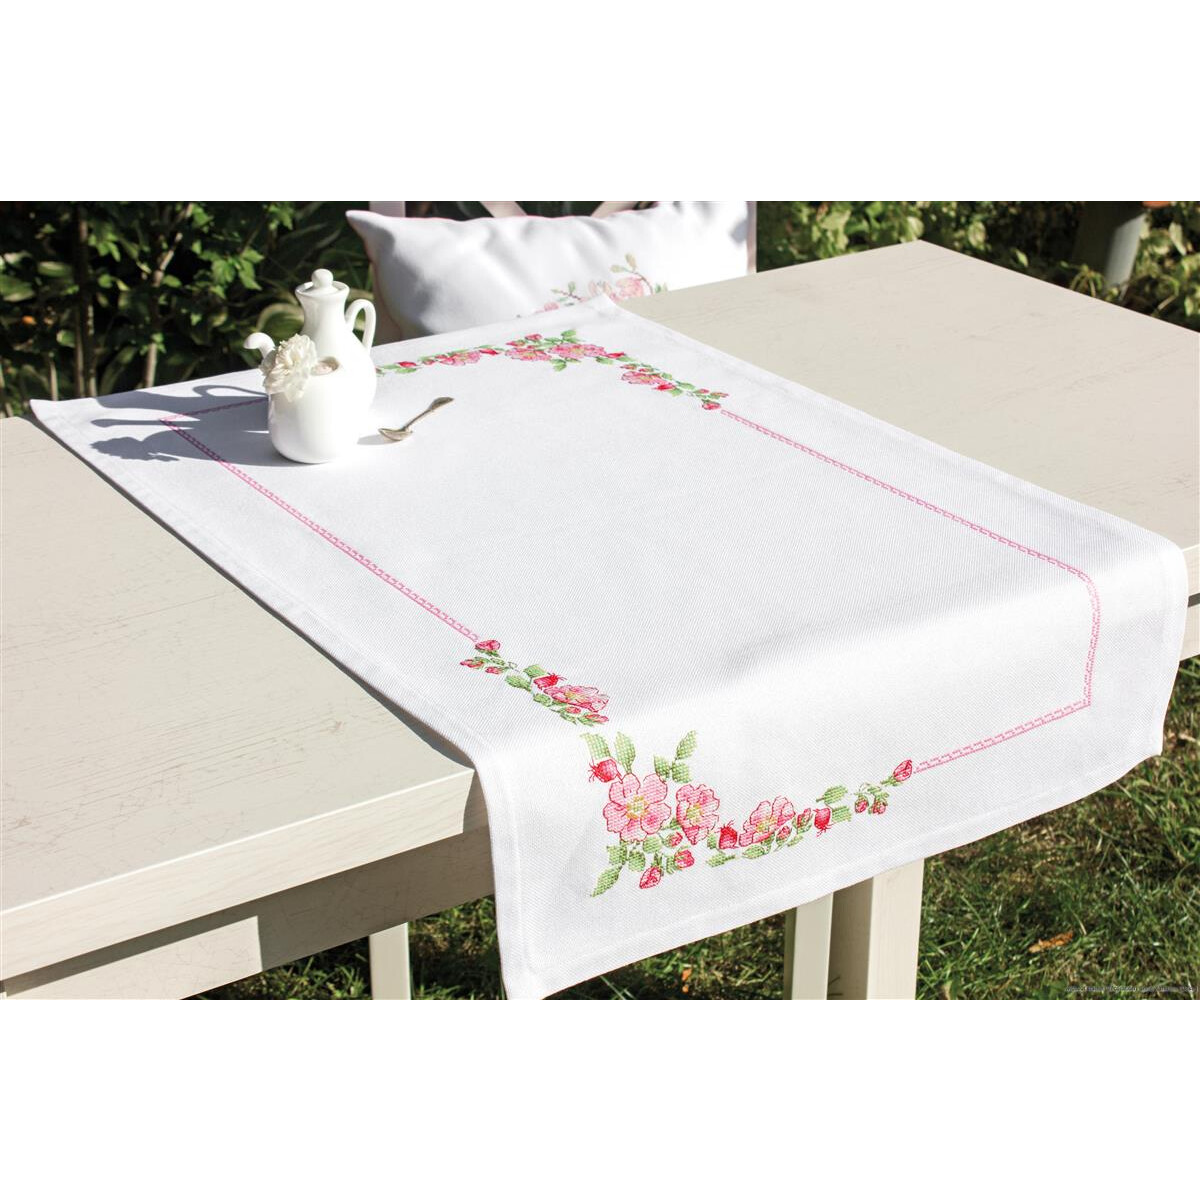 A white table on a lawn is decorated with a white...